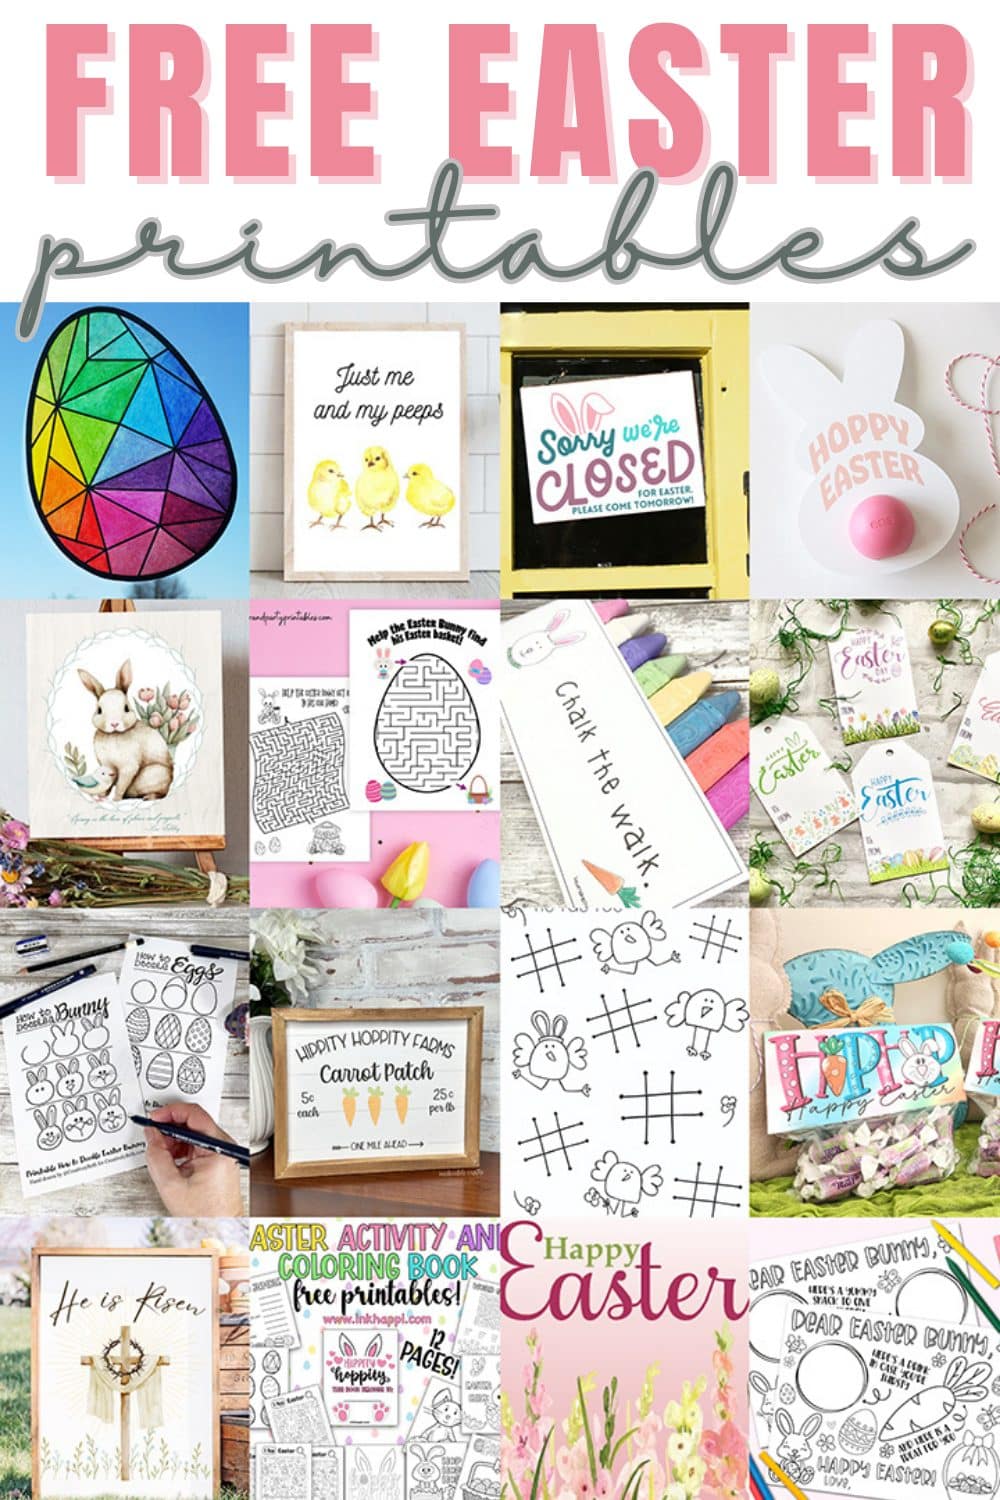 FREE EASTER PRINTABLES Photo Collage